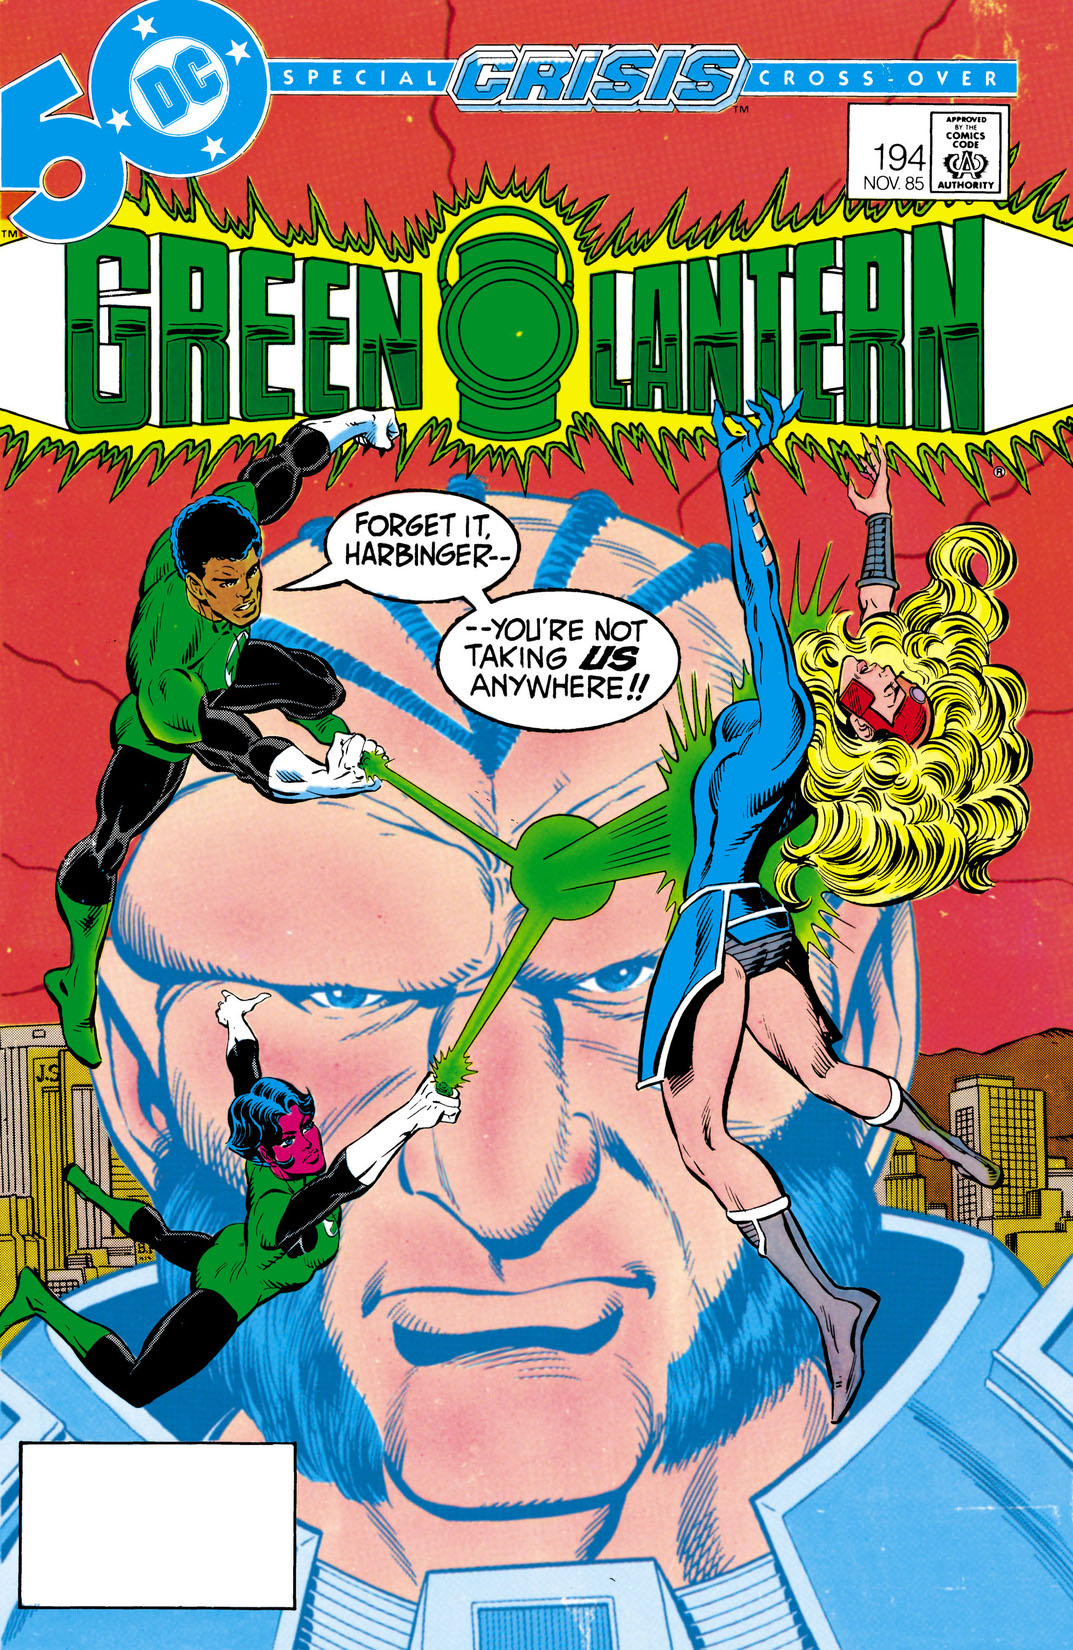 Green Lantern (1960-) #194 preview images